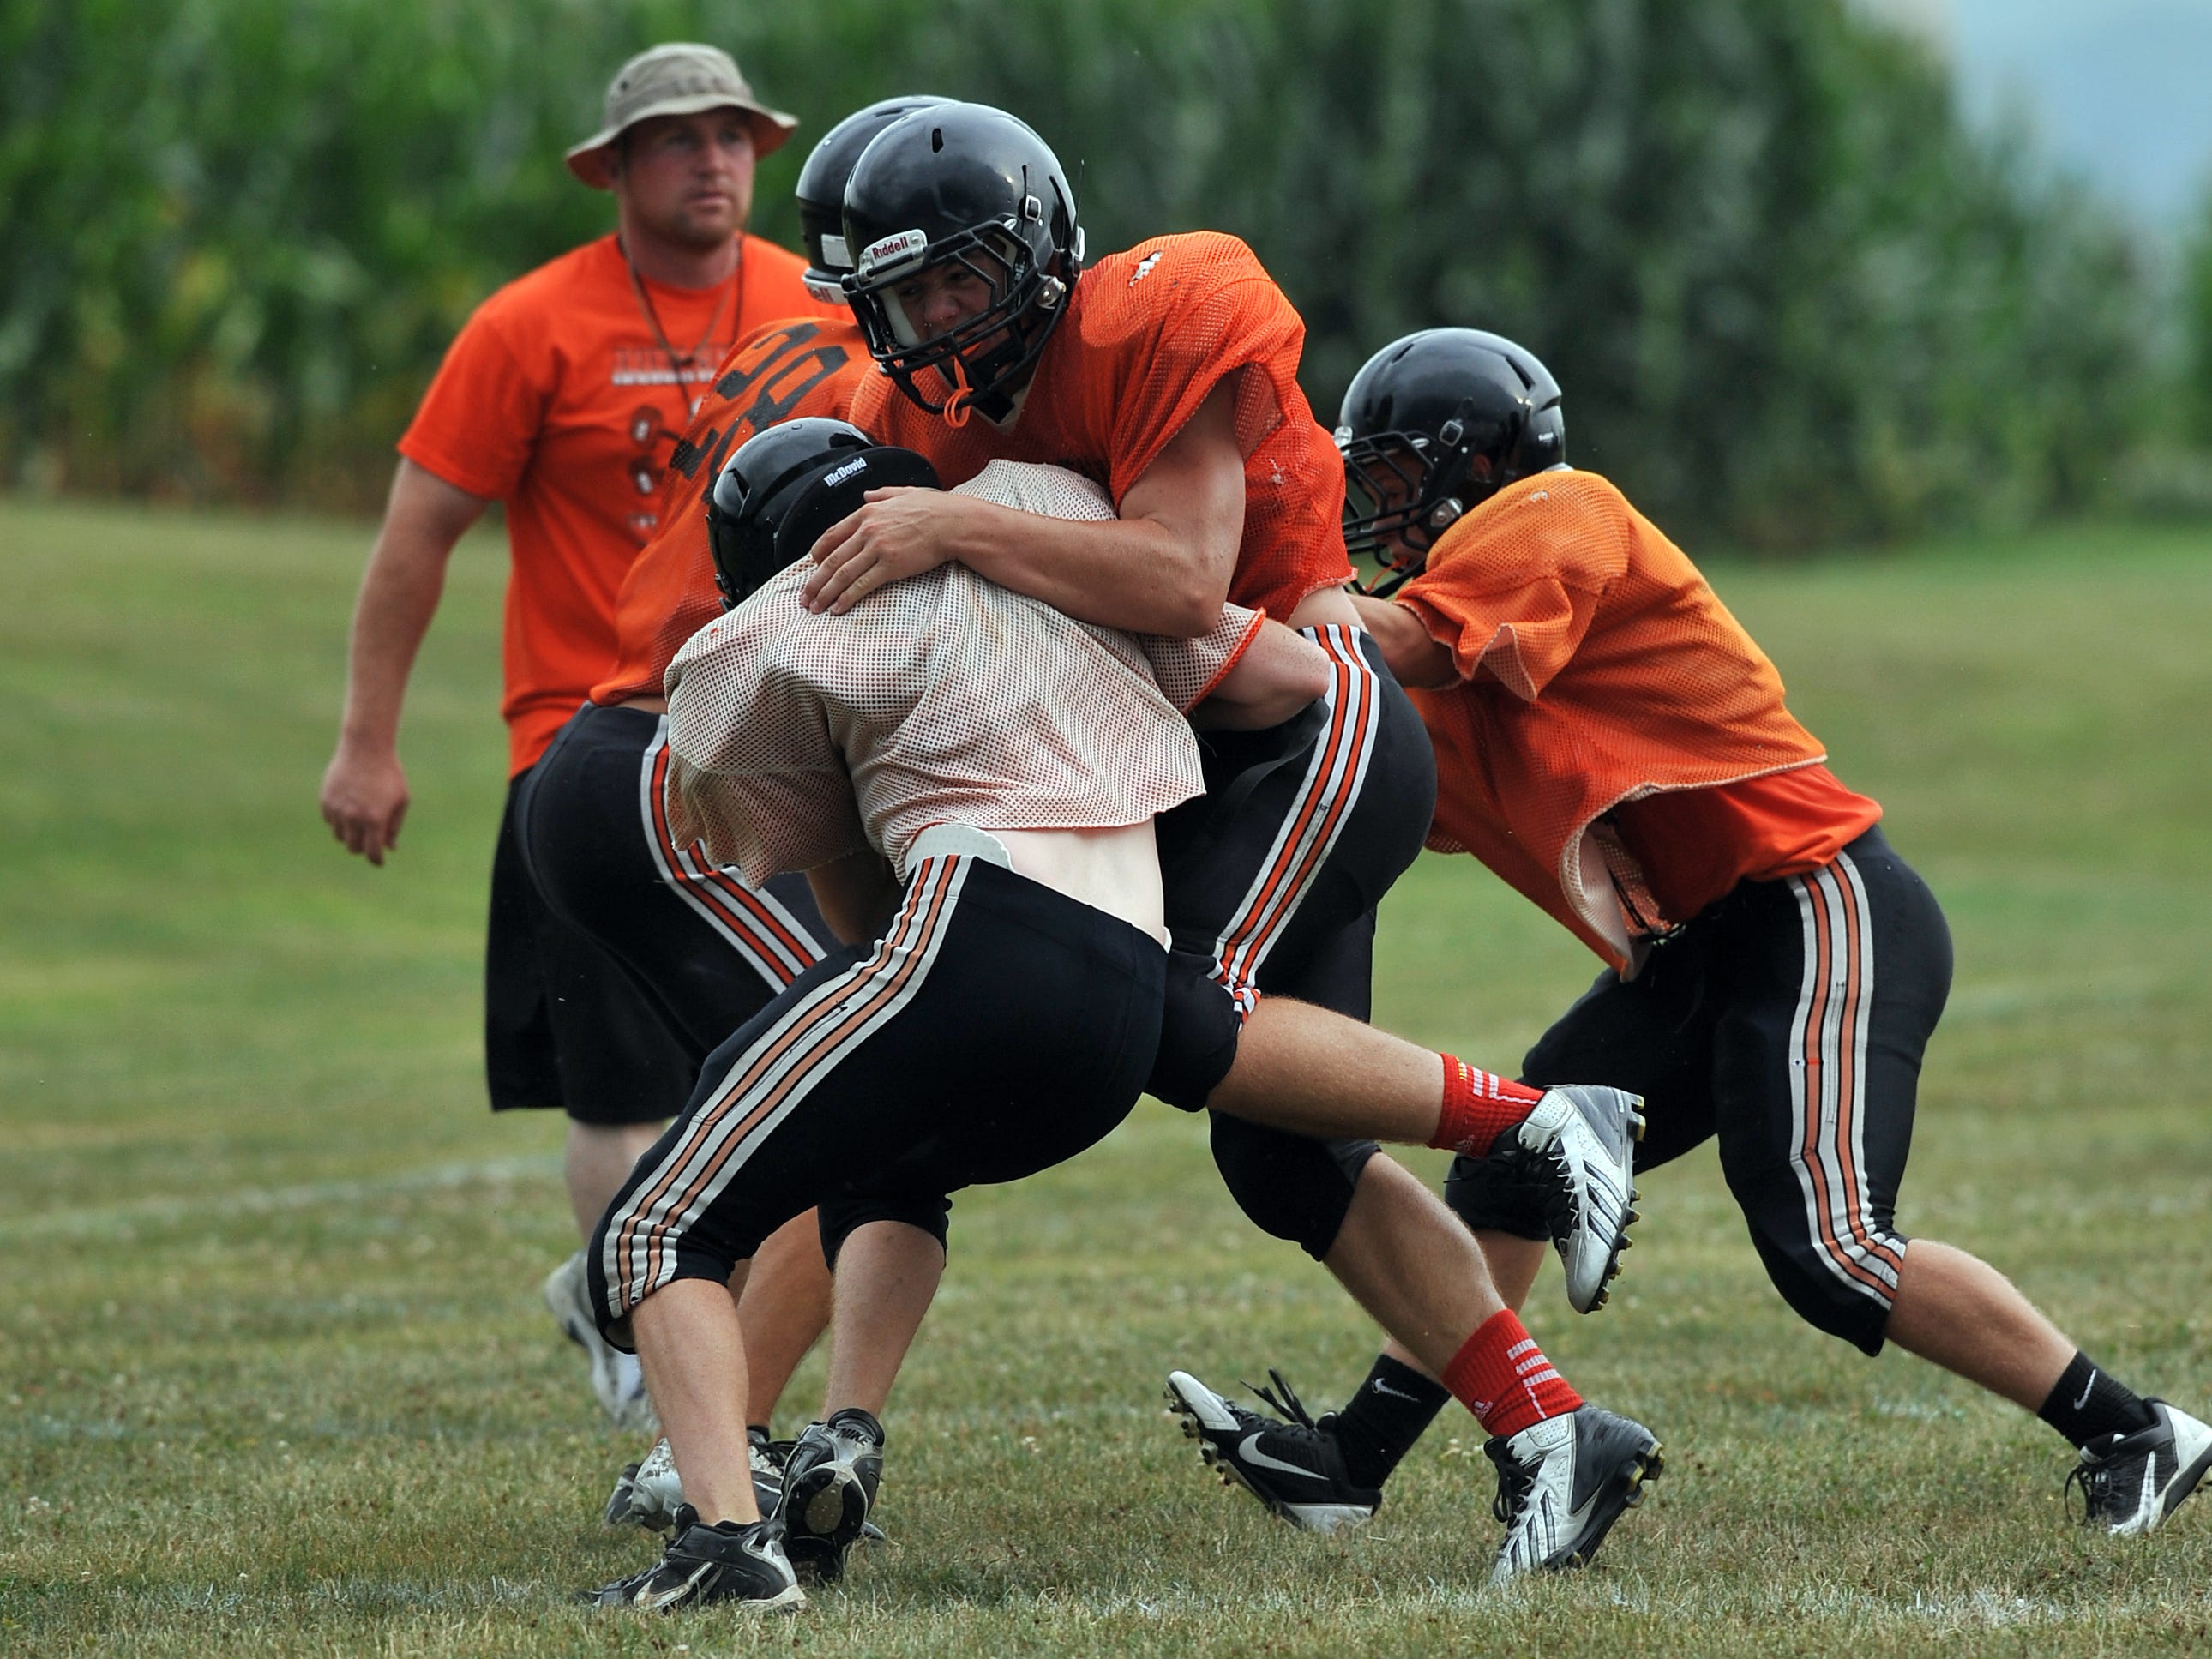  Amanda-Clearcreek senior Cole Genders blocks a teammate during a kickoff drill during an Aug. 6 practice in Amanda. 